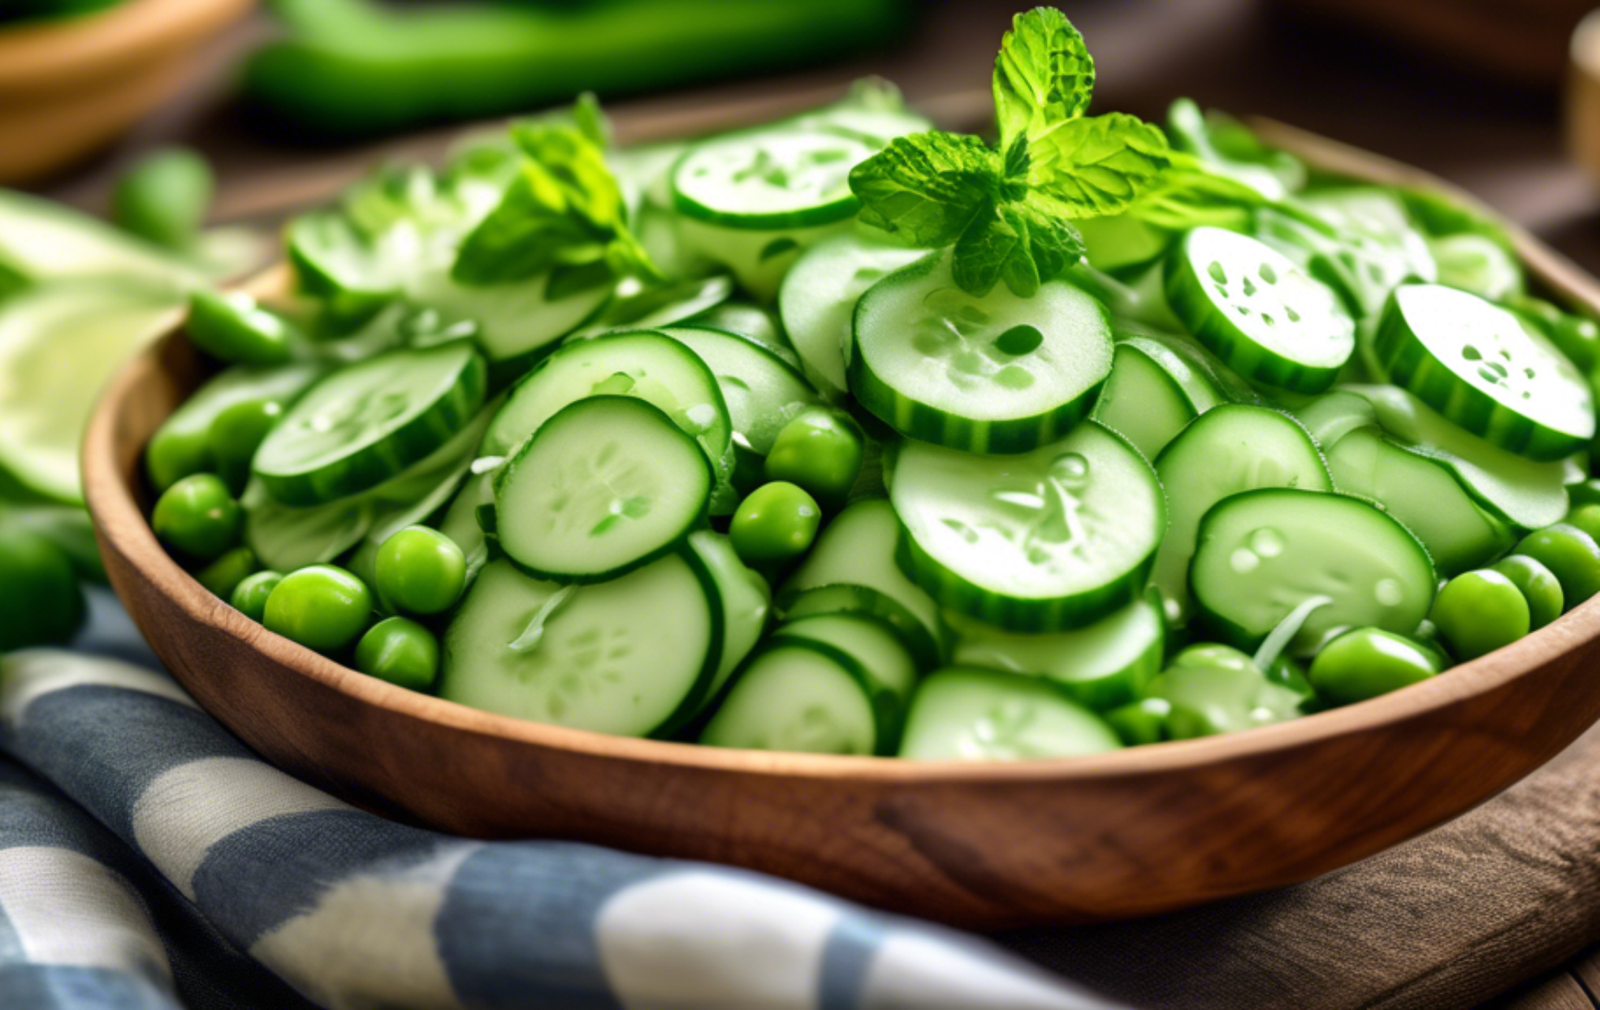 Create an image featuring a vibrant salad composed of sliced cucumbers and peas, mixed with fresh mint leaves. The salad should be presented in a rustic wooden bowl, with the green colors of the ingre